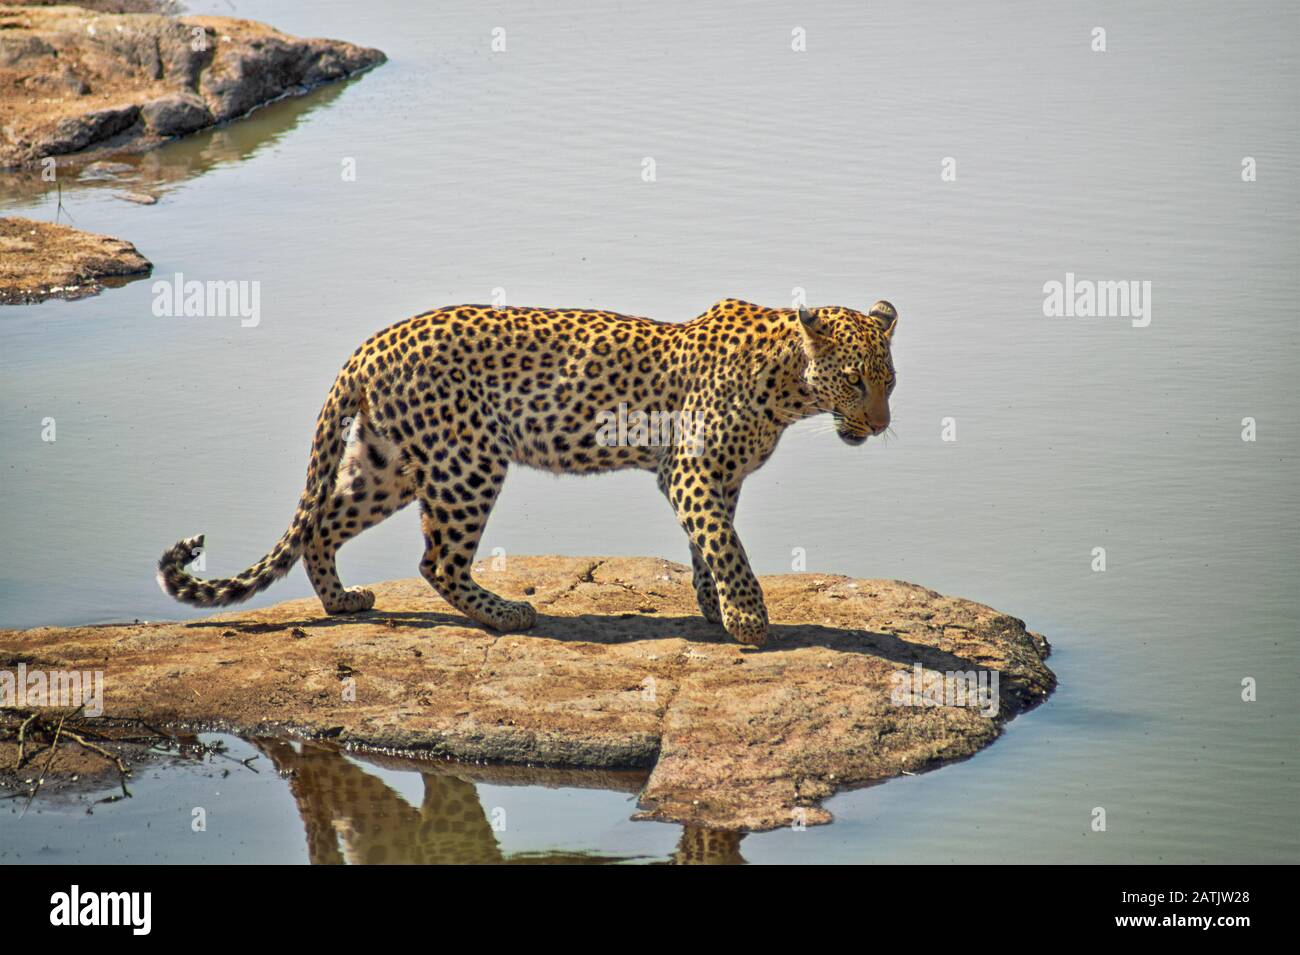 Leopard standing on a rock by a lake wating for a fish to appear Stock Photo